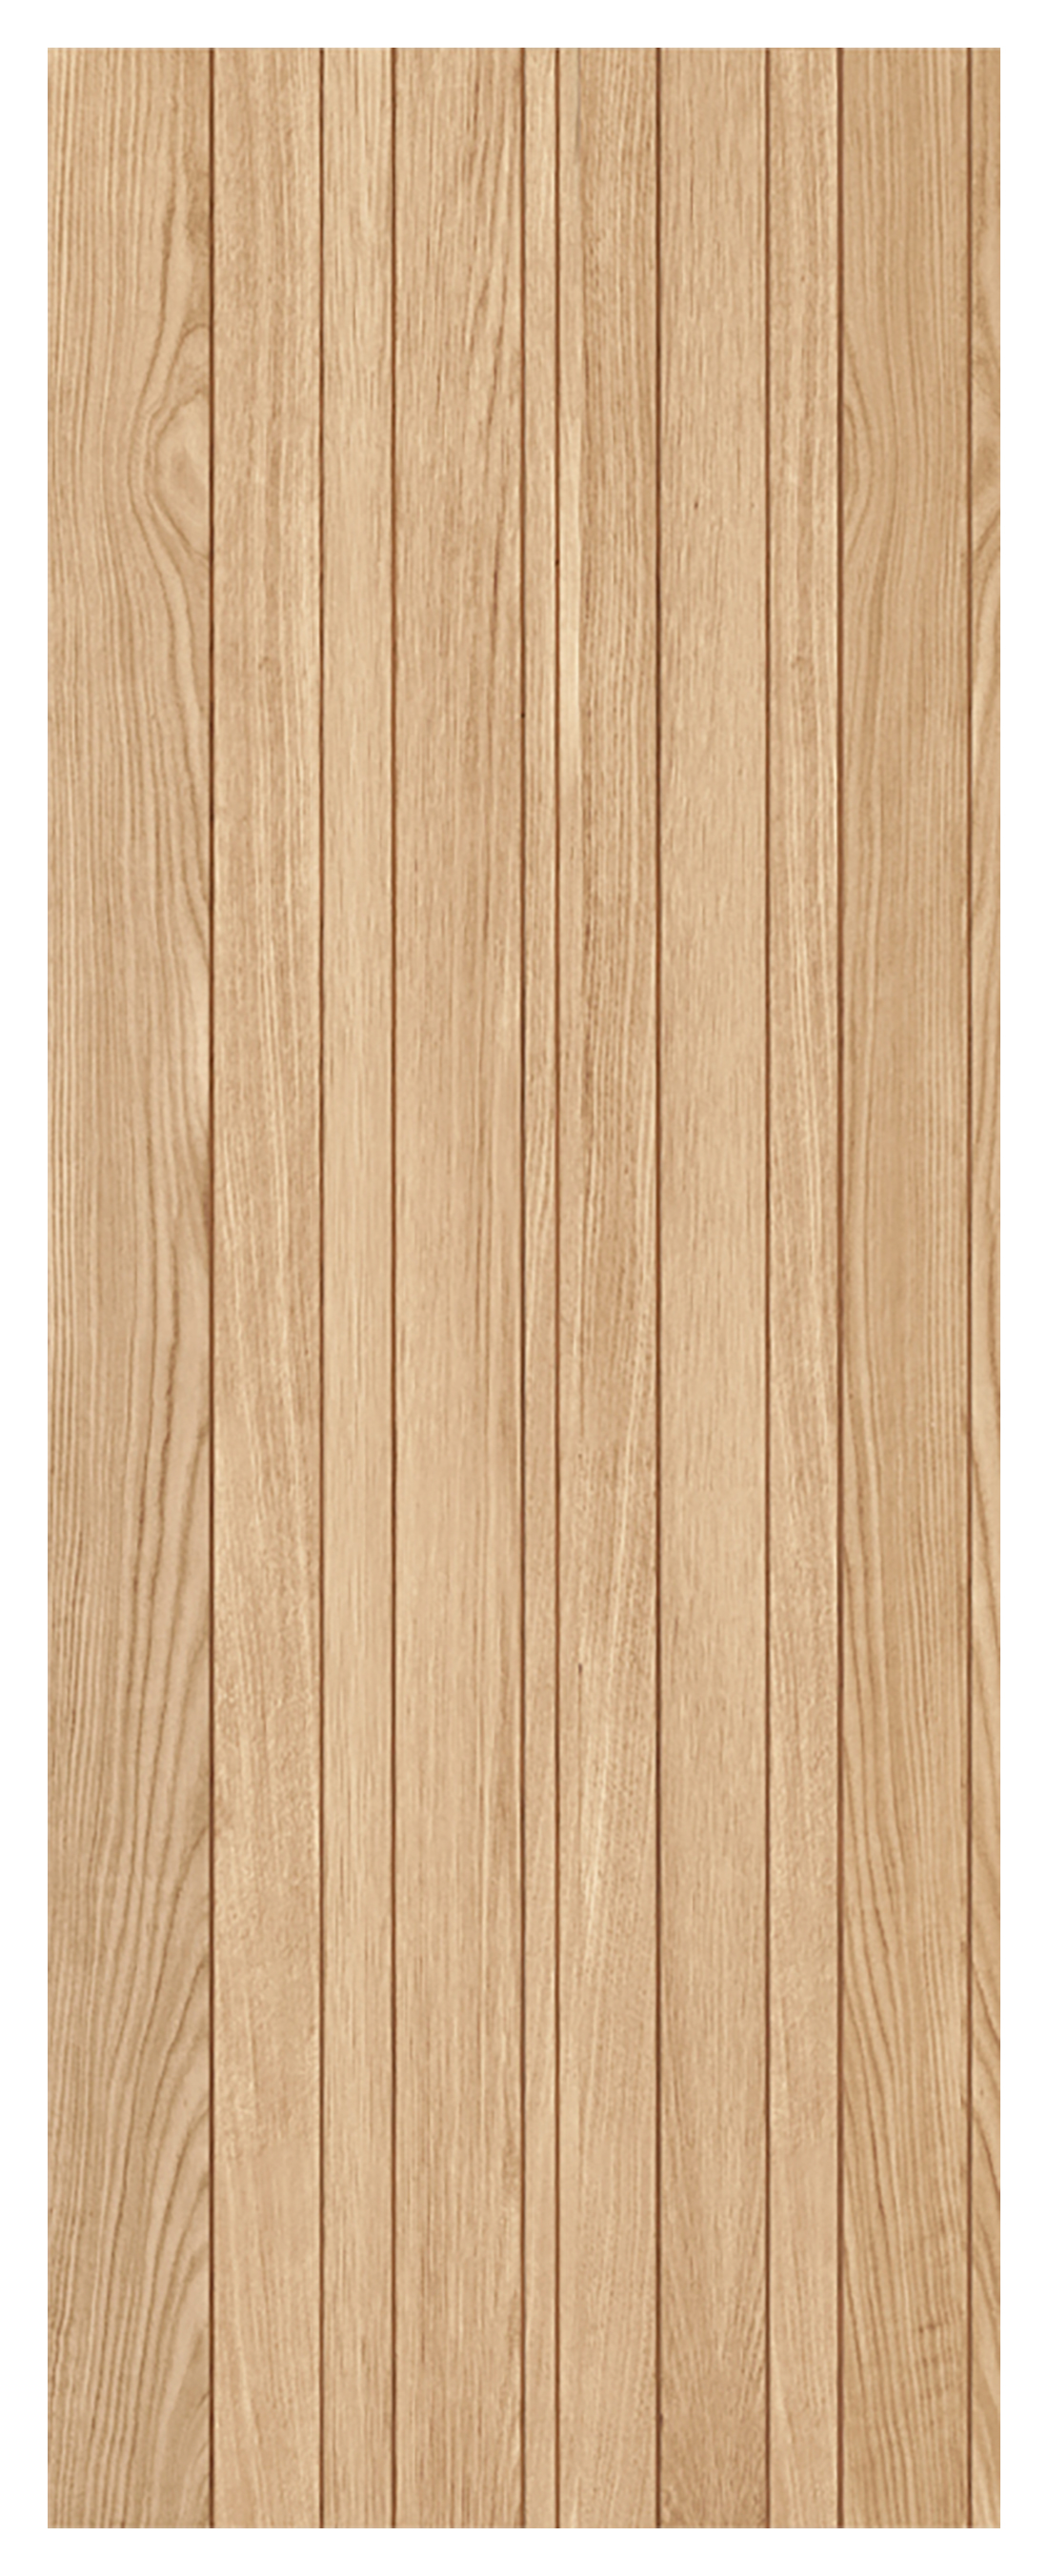 Image of LPD Internal Montreal Pre-Finished Oak Solid Core Door - 838 x 1981mm